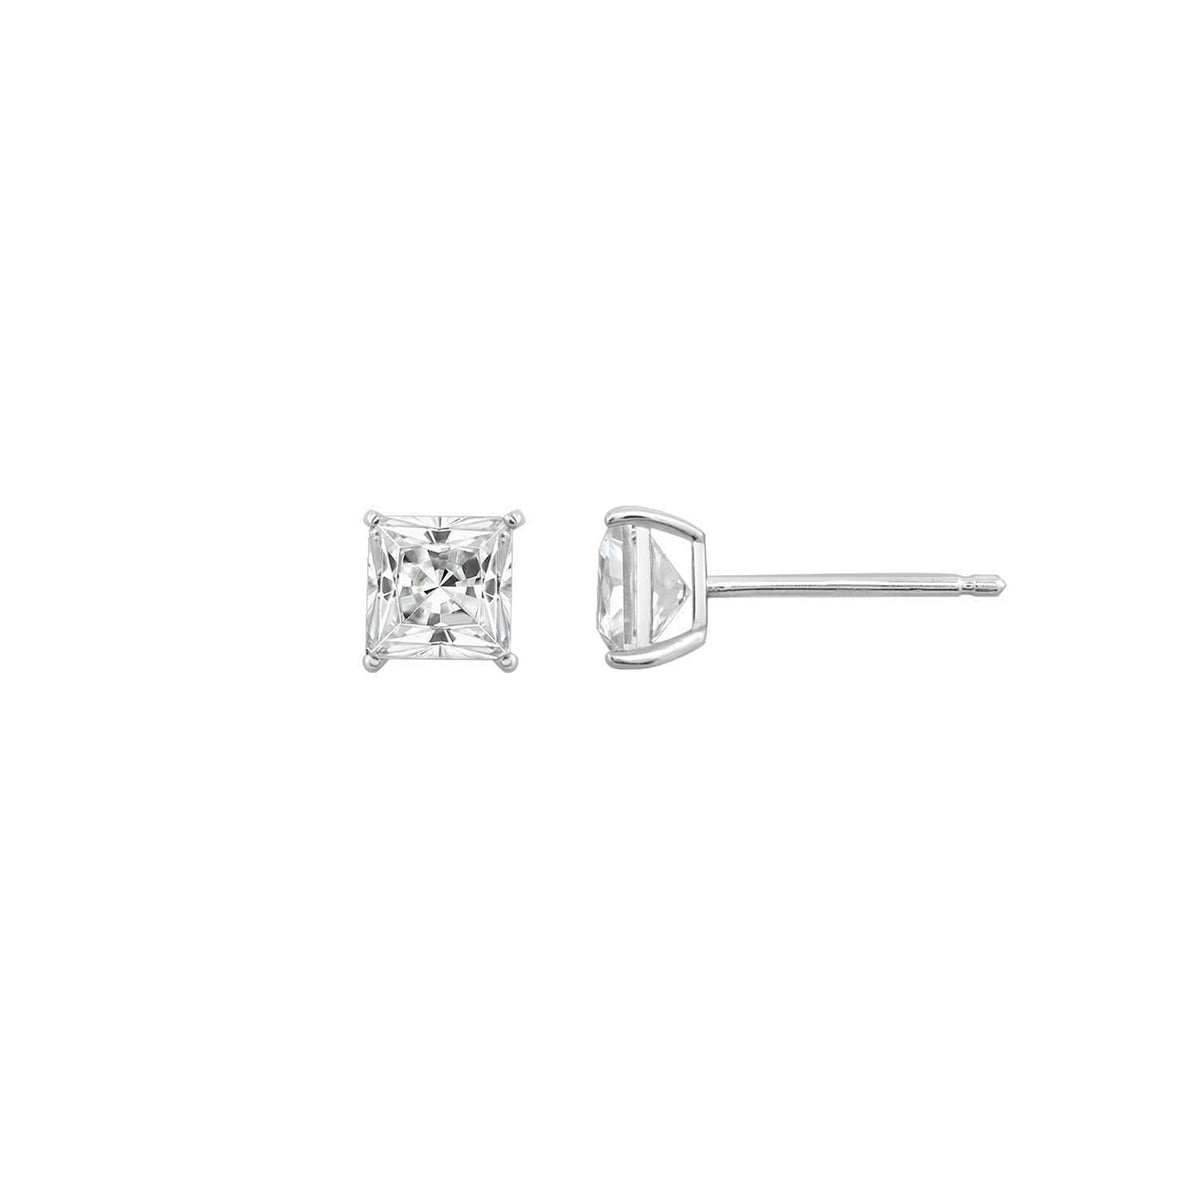 10K Solid Gold Solitaire Earrings